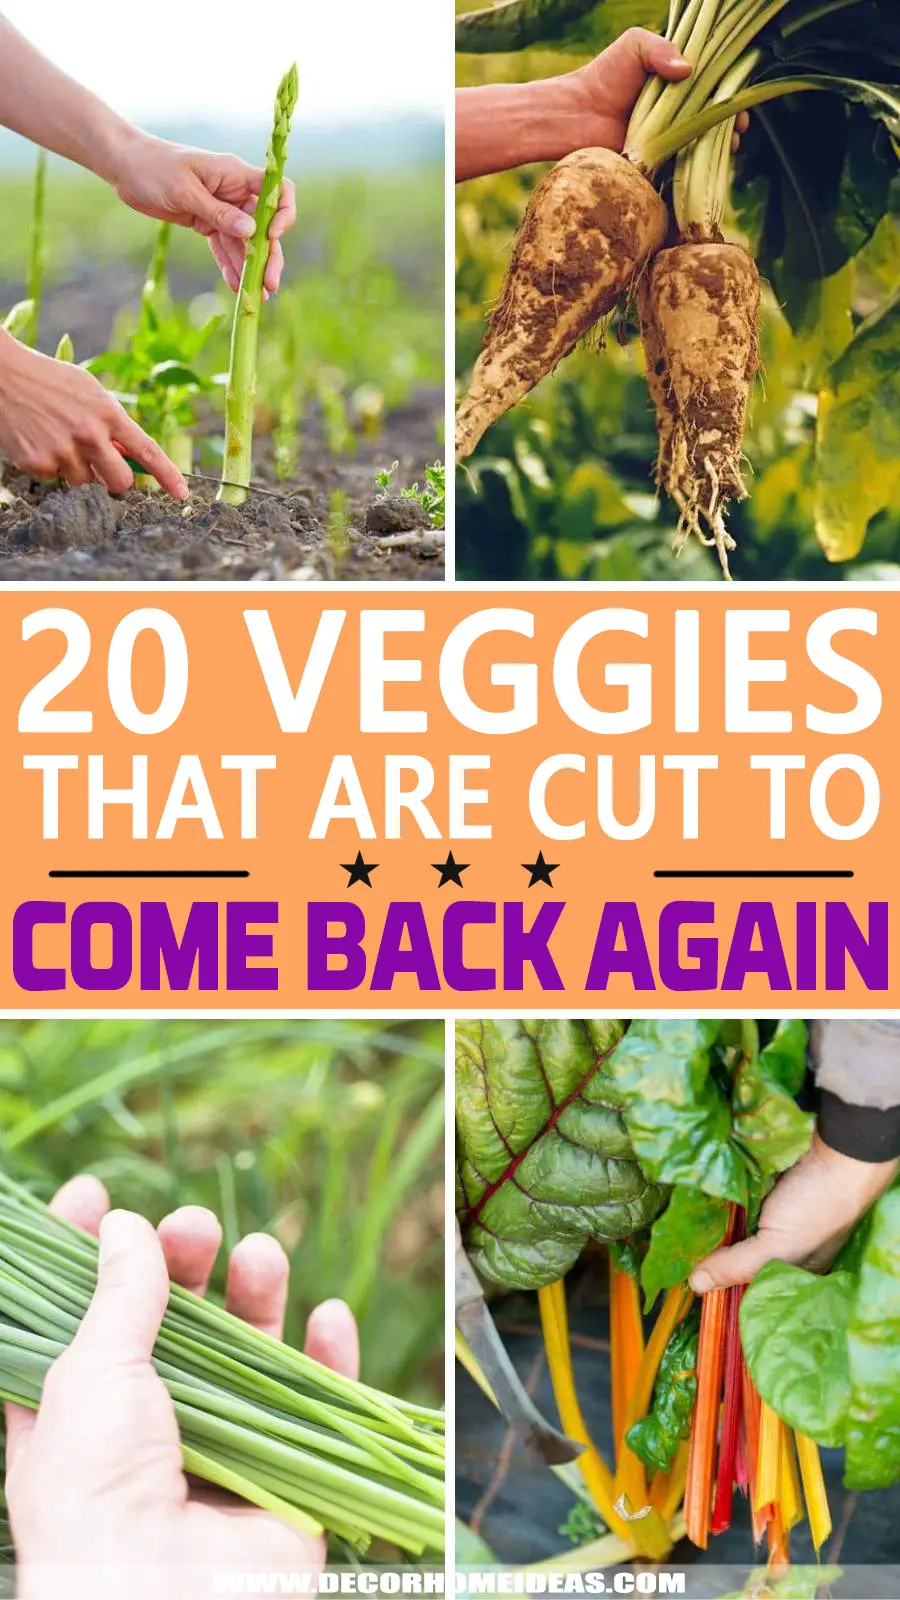 Are you tired of buying vegetables that wither away after one use? Check out these 20 veggies that will regrow again and again, saving you money and trips to the grocery store!